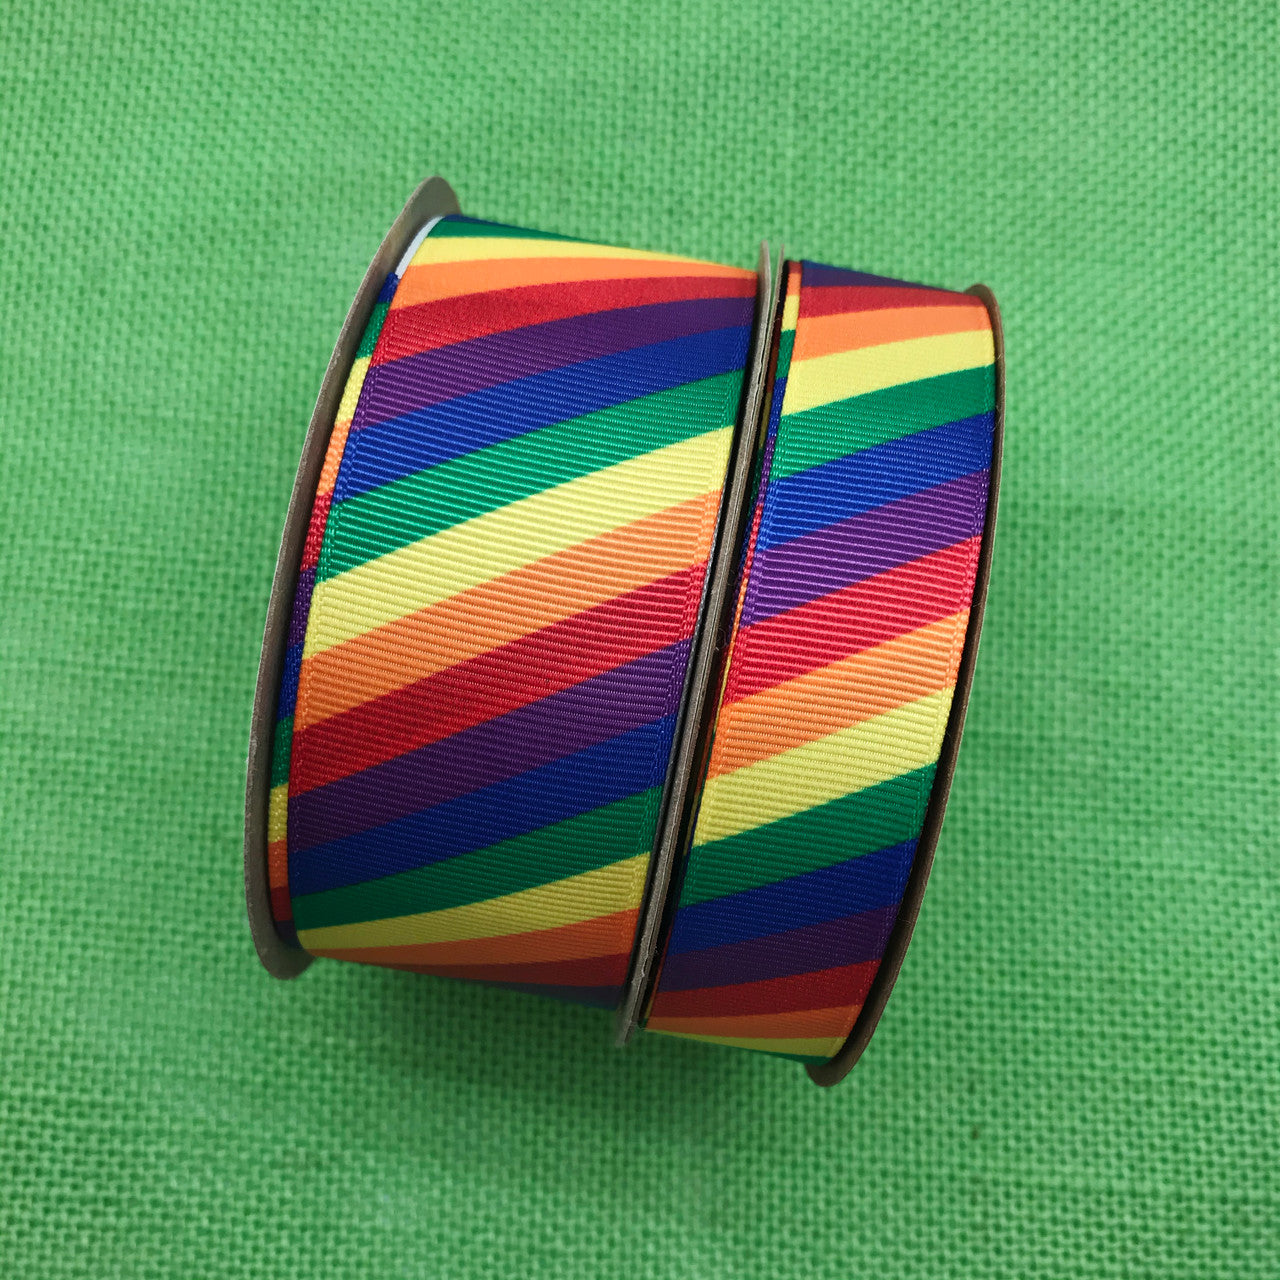 Rainbow stripes in primary colors printed on 1.5 white grosgrain